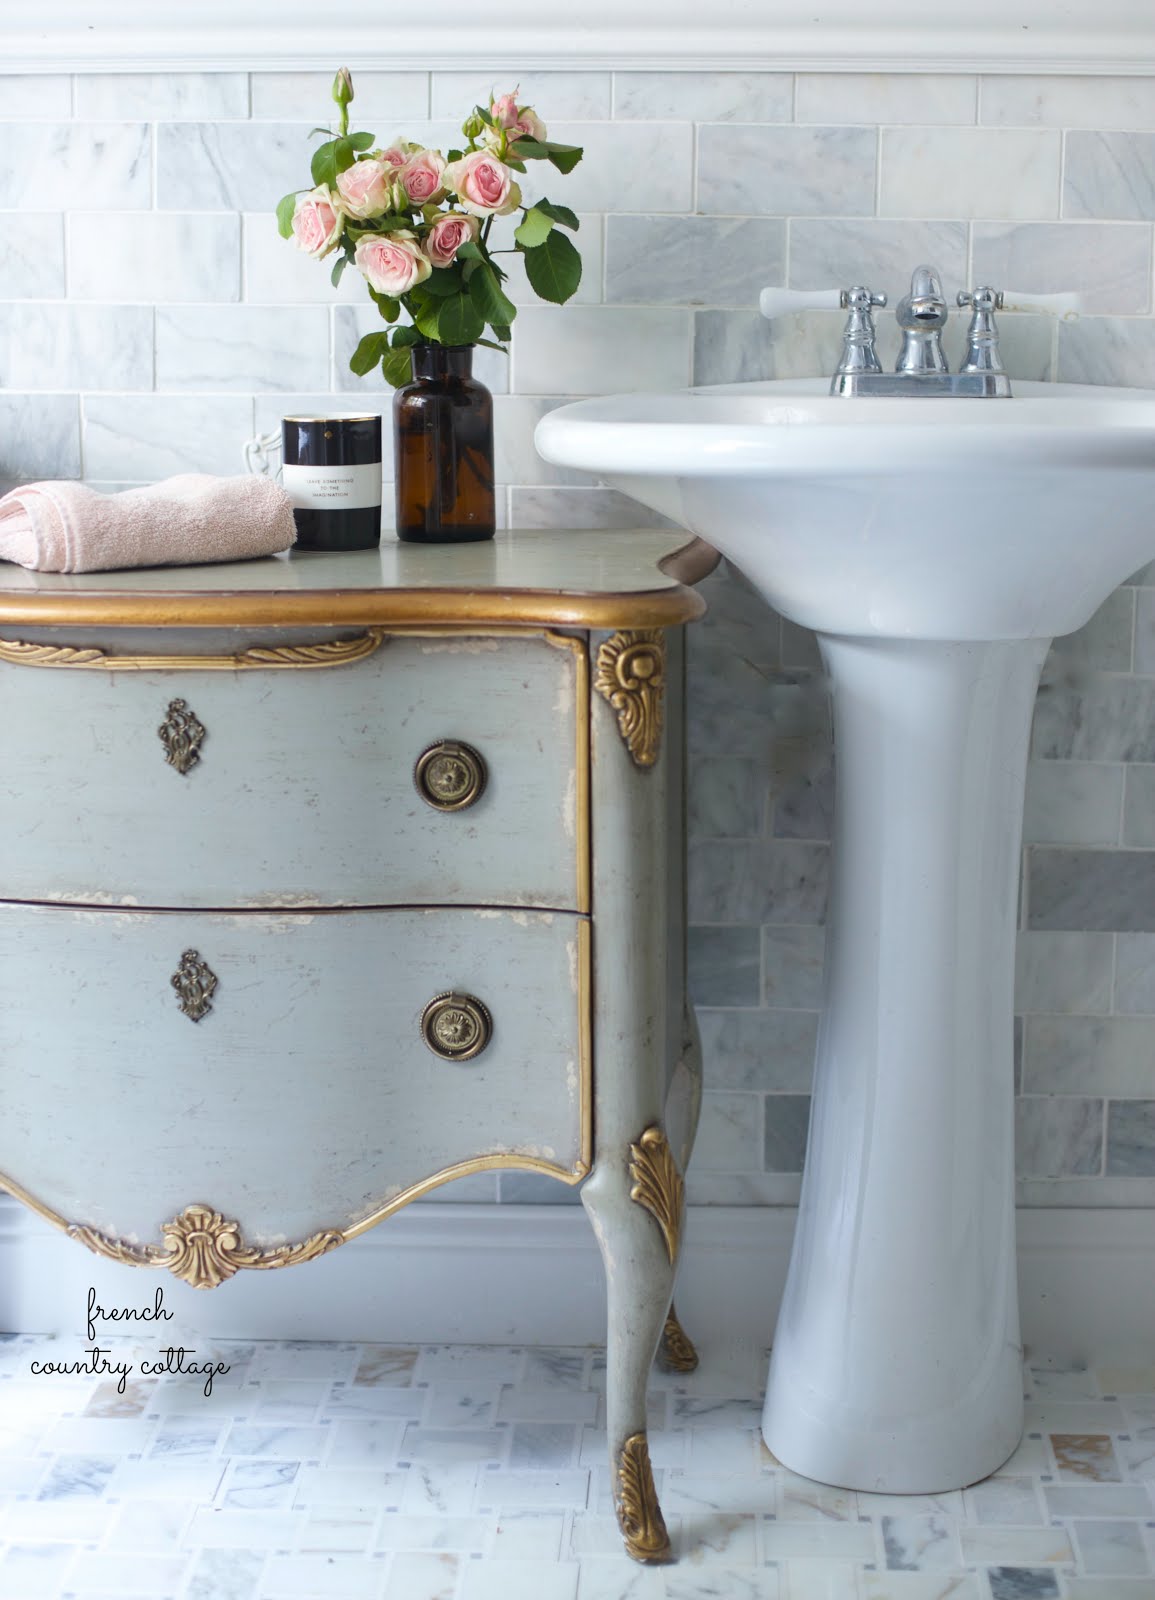 Shabby chic vintage bathroom cabinet to lend weathered charm